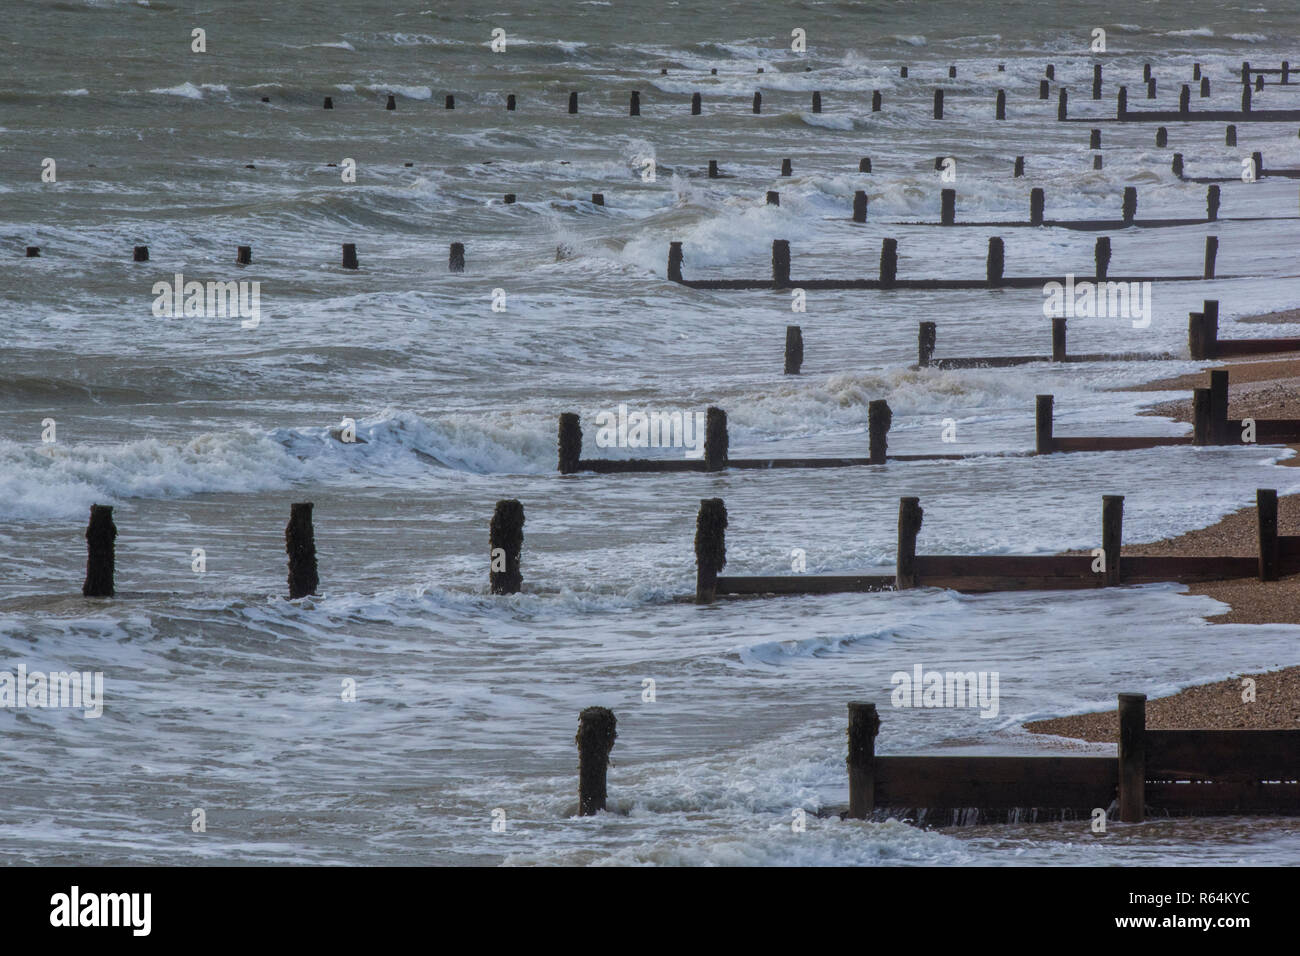 wooden groynes and breakwaters on the seafront in rough weather at Bognor regis in west sussex. Stock Photo